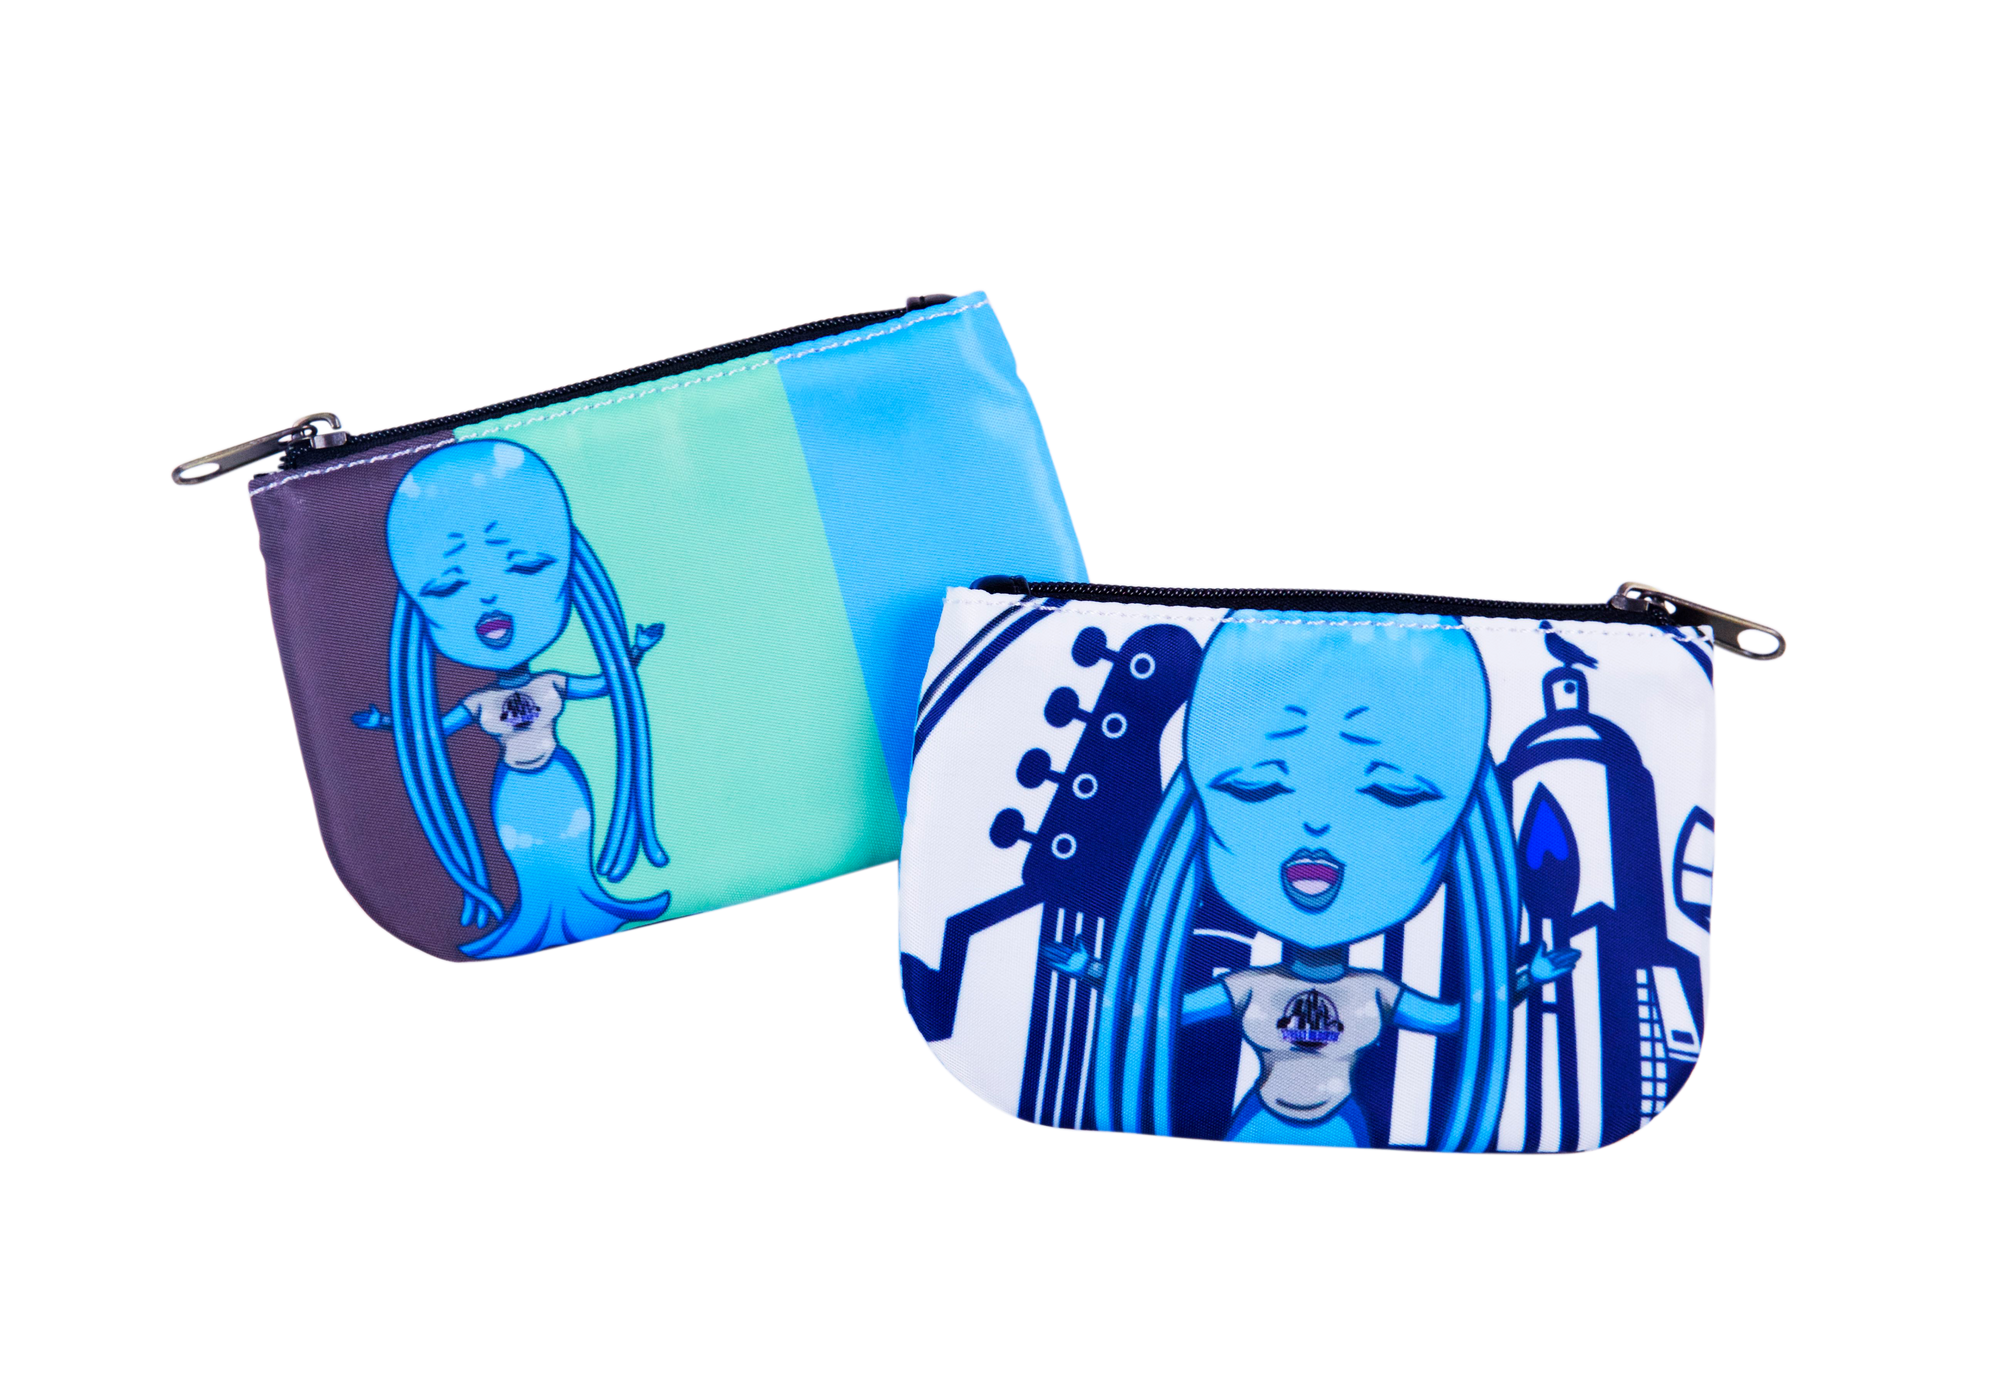 FifthElement Coin Purse - Mini Hand Bag - Travel Pocket Wallet For Change And Accessories